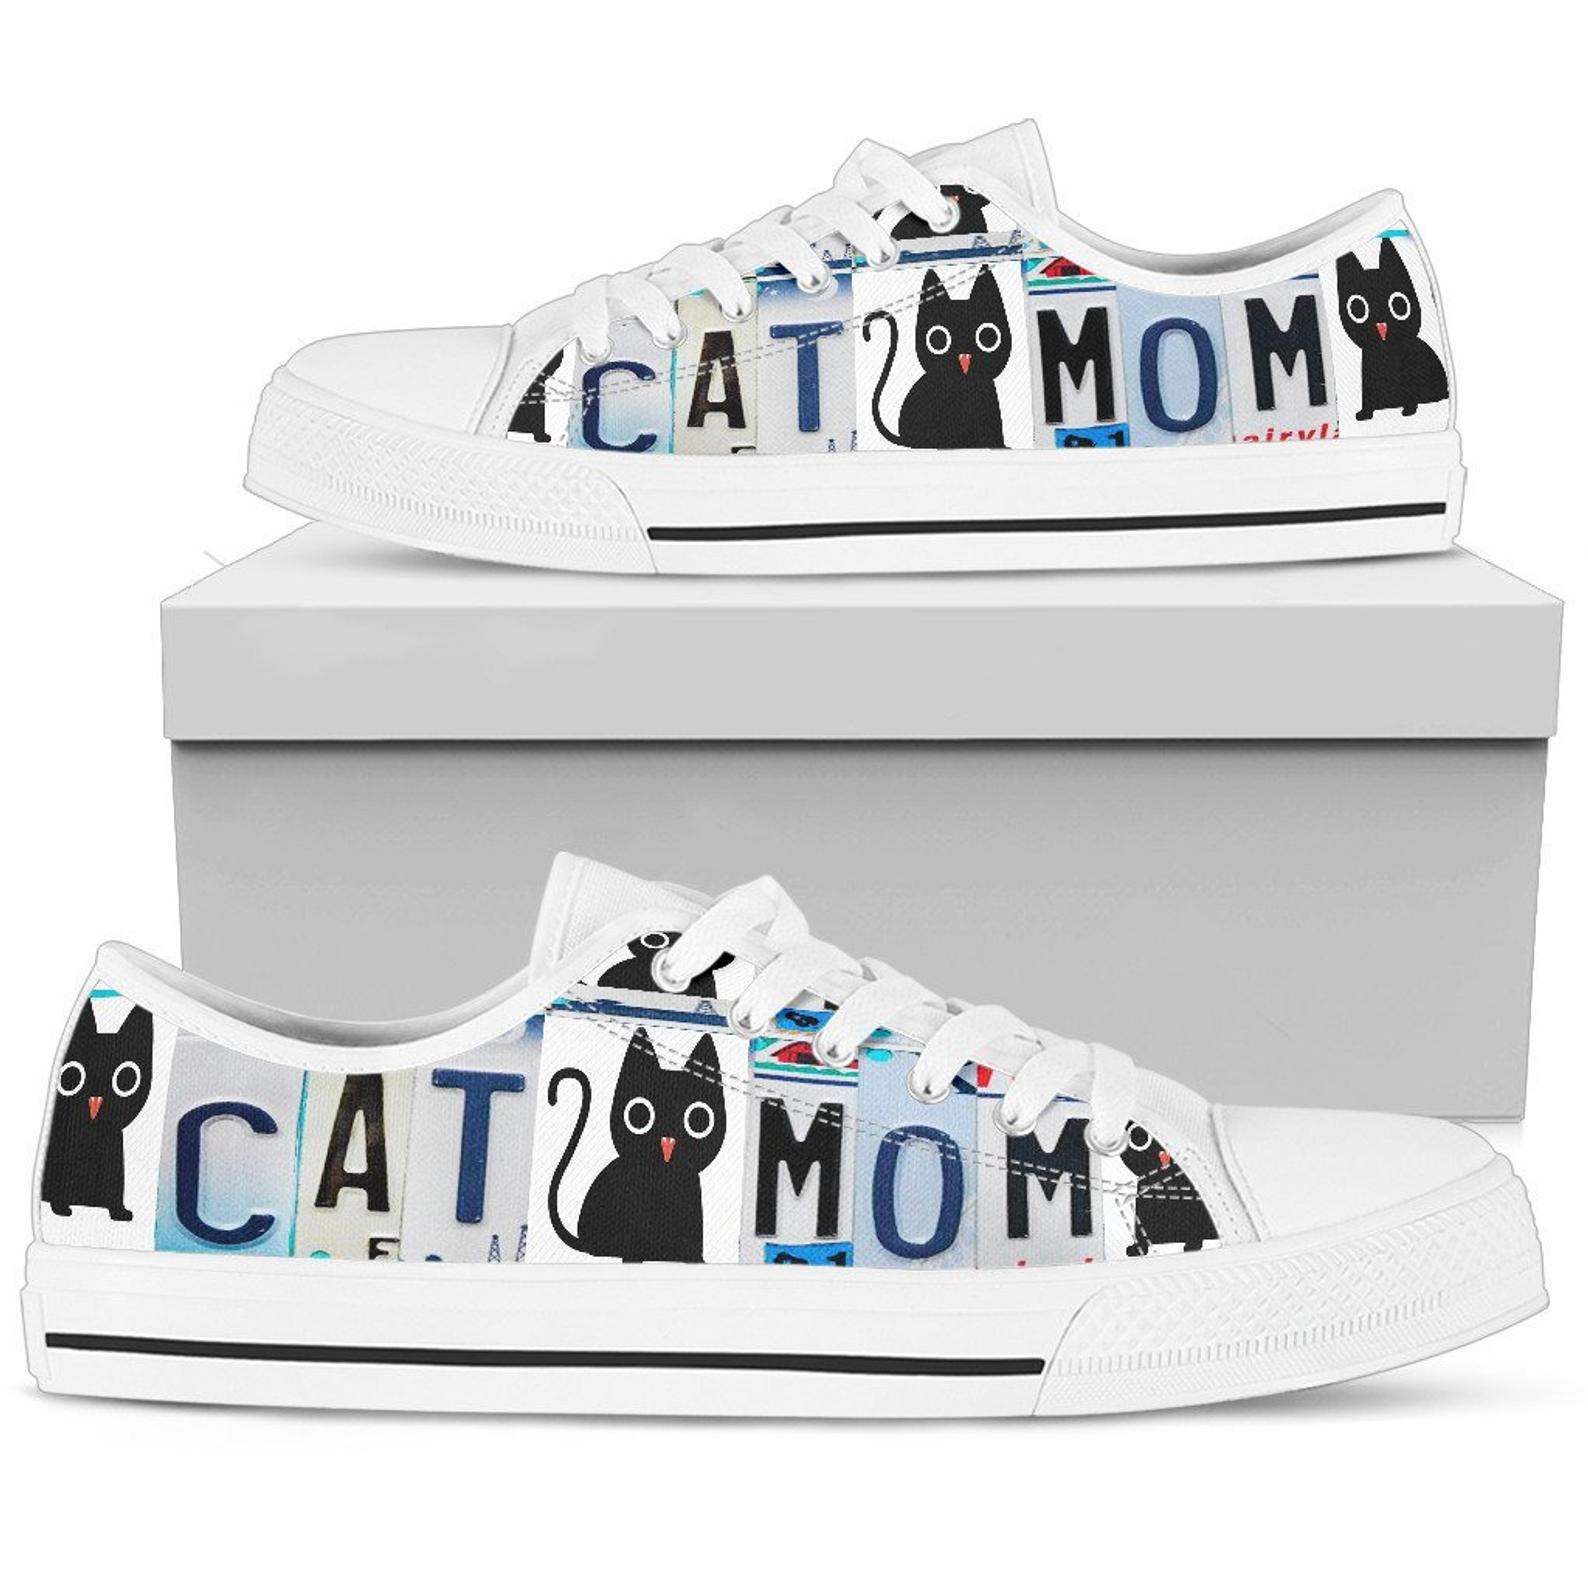 Black Cat Mom Mother's Day Gift Low Top Shoes